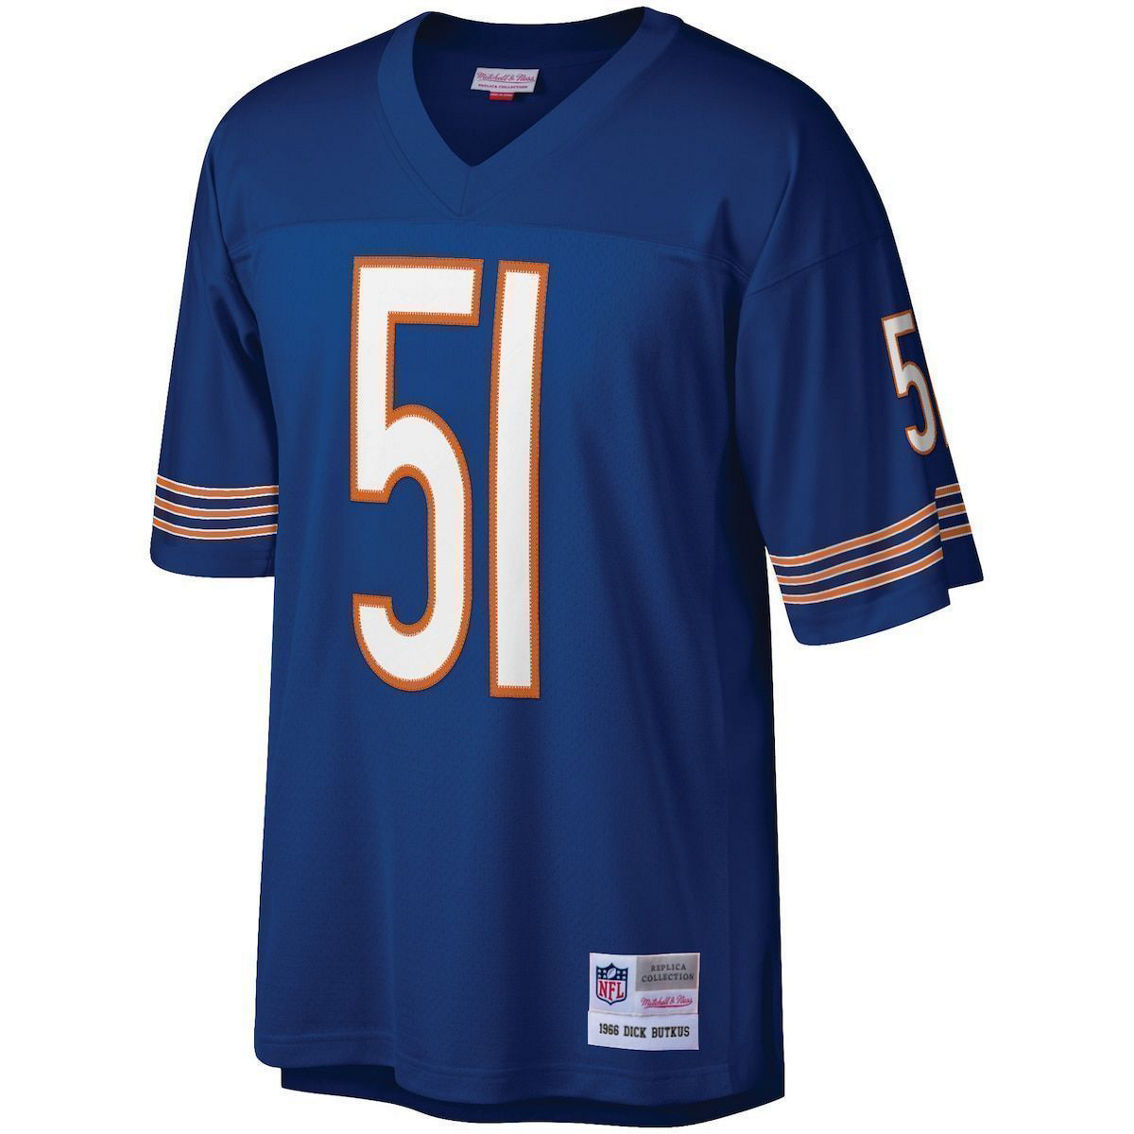 Mitchell & Ness Men's Dick Butkus Navy Chicago Bears Retired Player Legacy Replica Jersey - Image 3 of 4